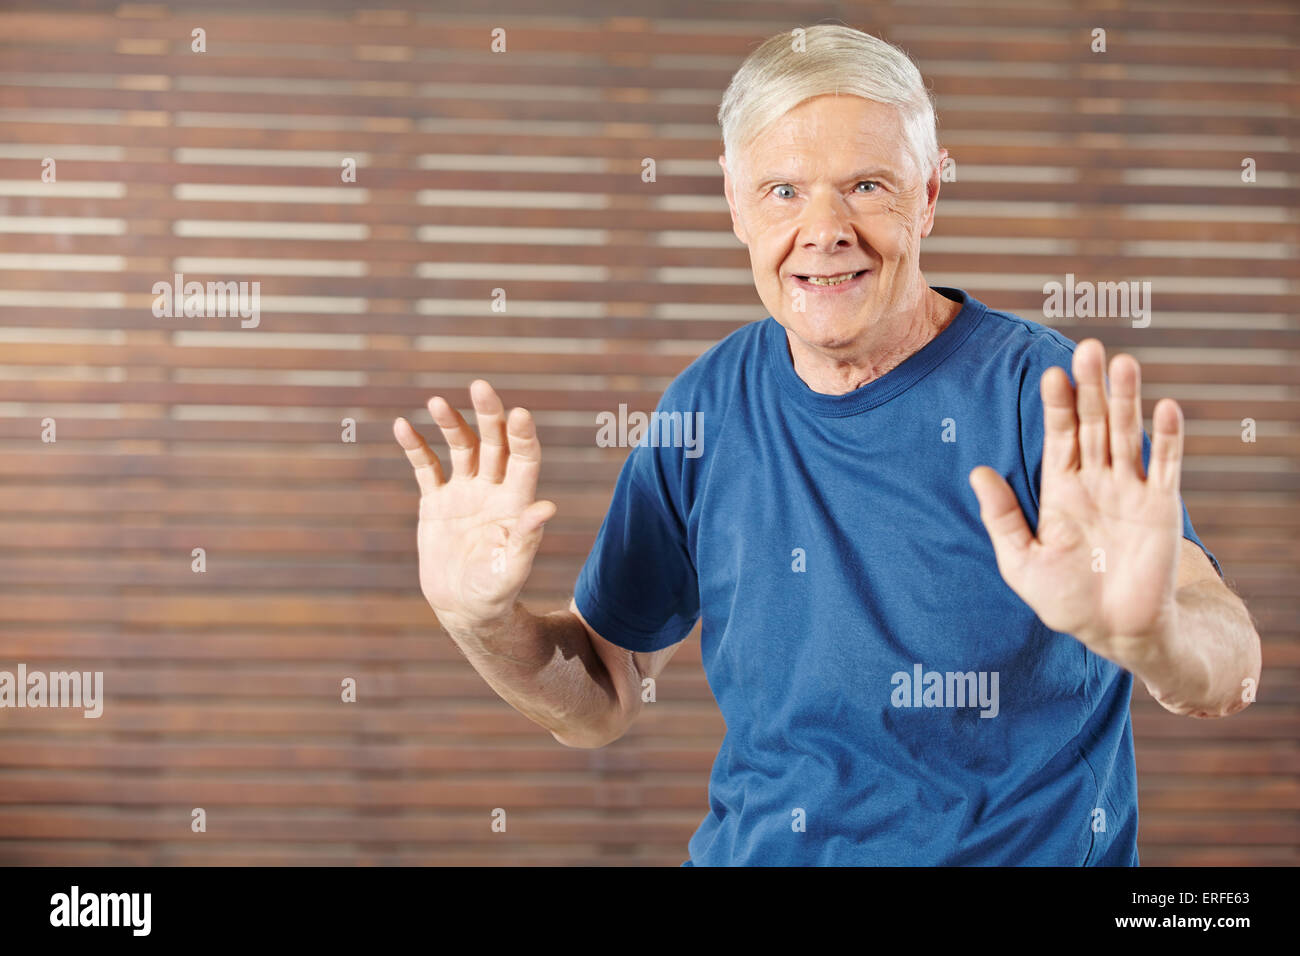 Old man doing gymnastics in fitness center and moving his hands Stock Photo